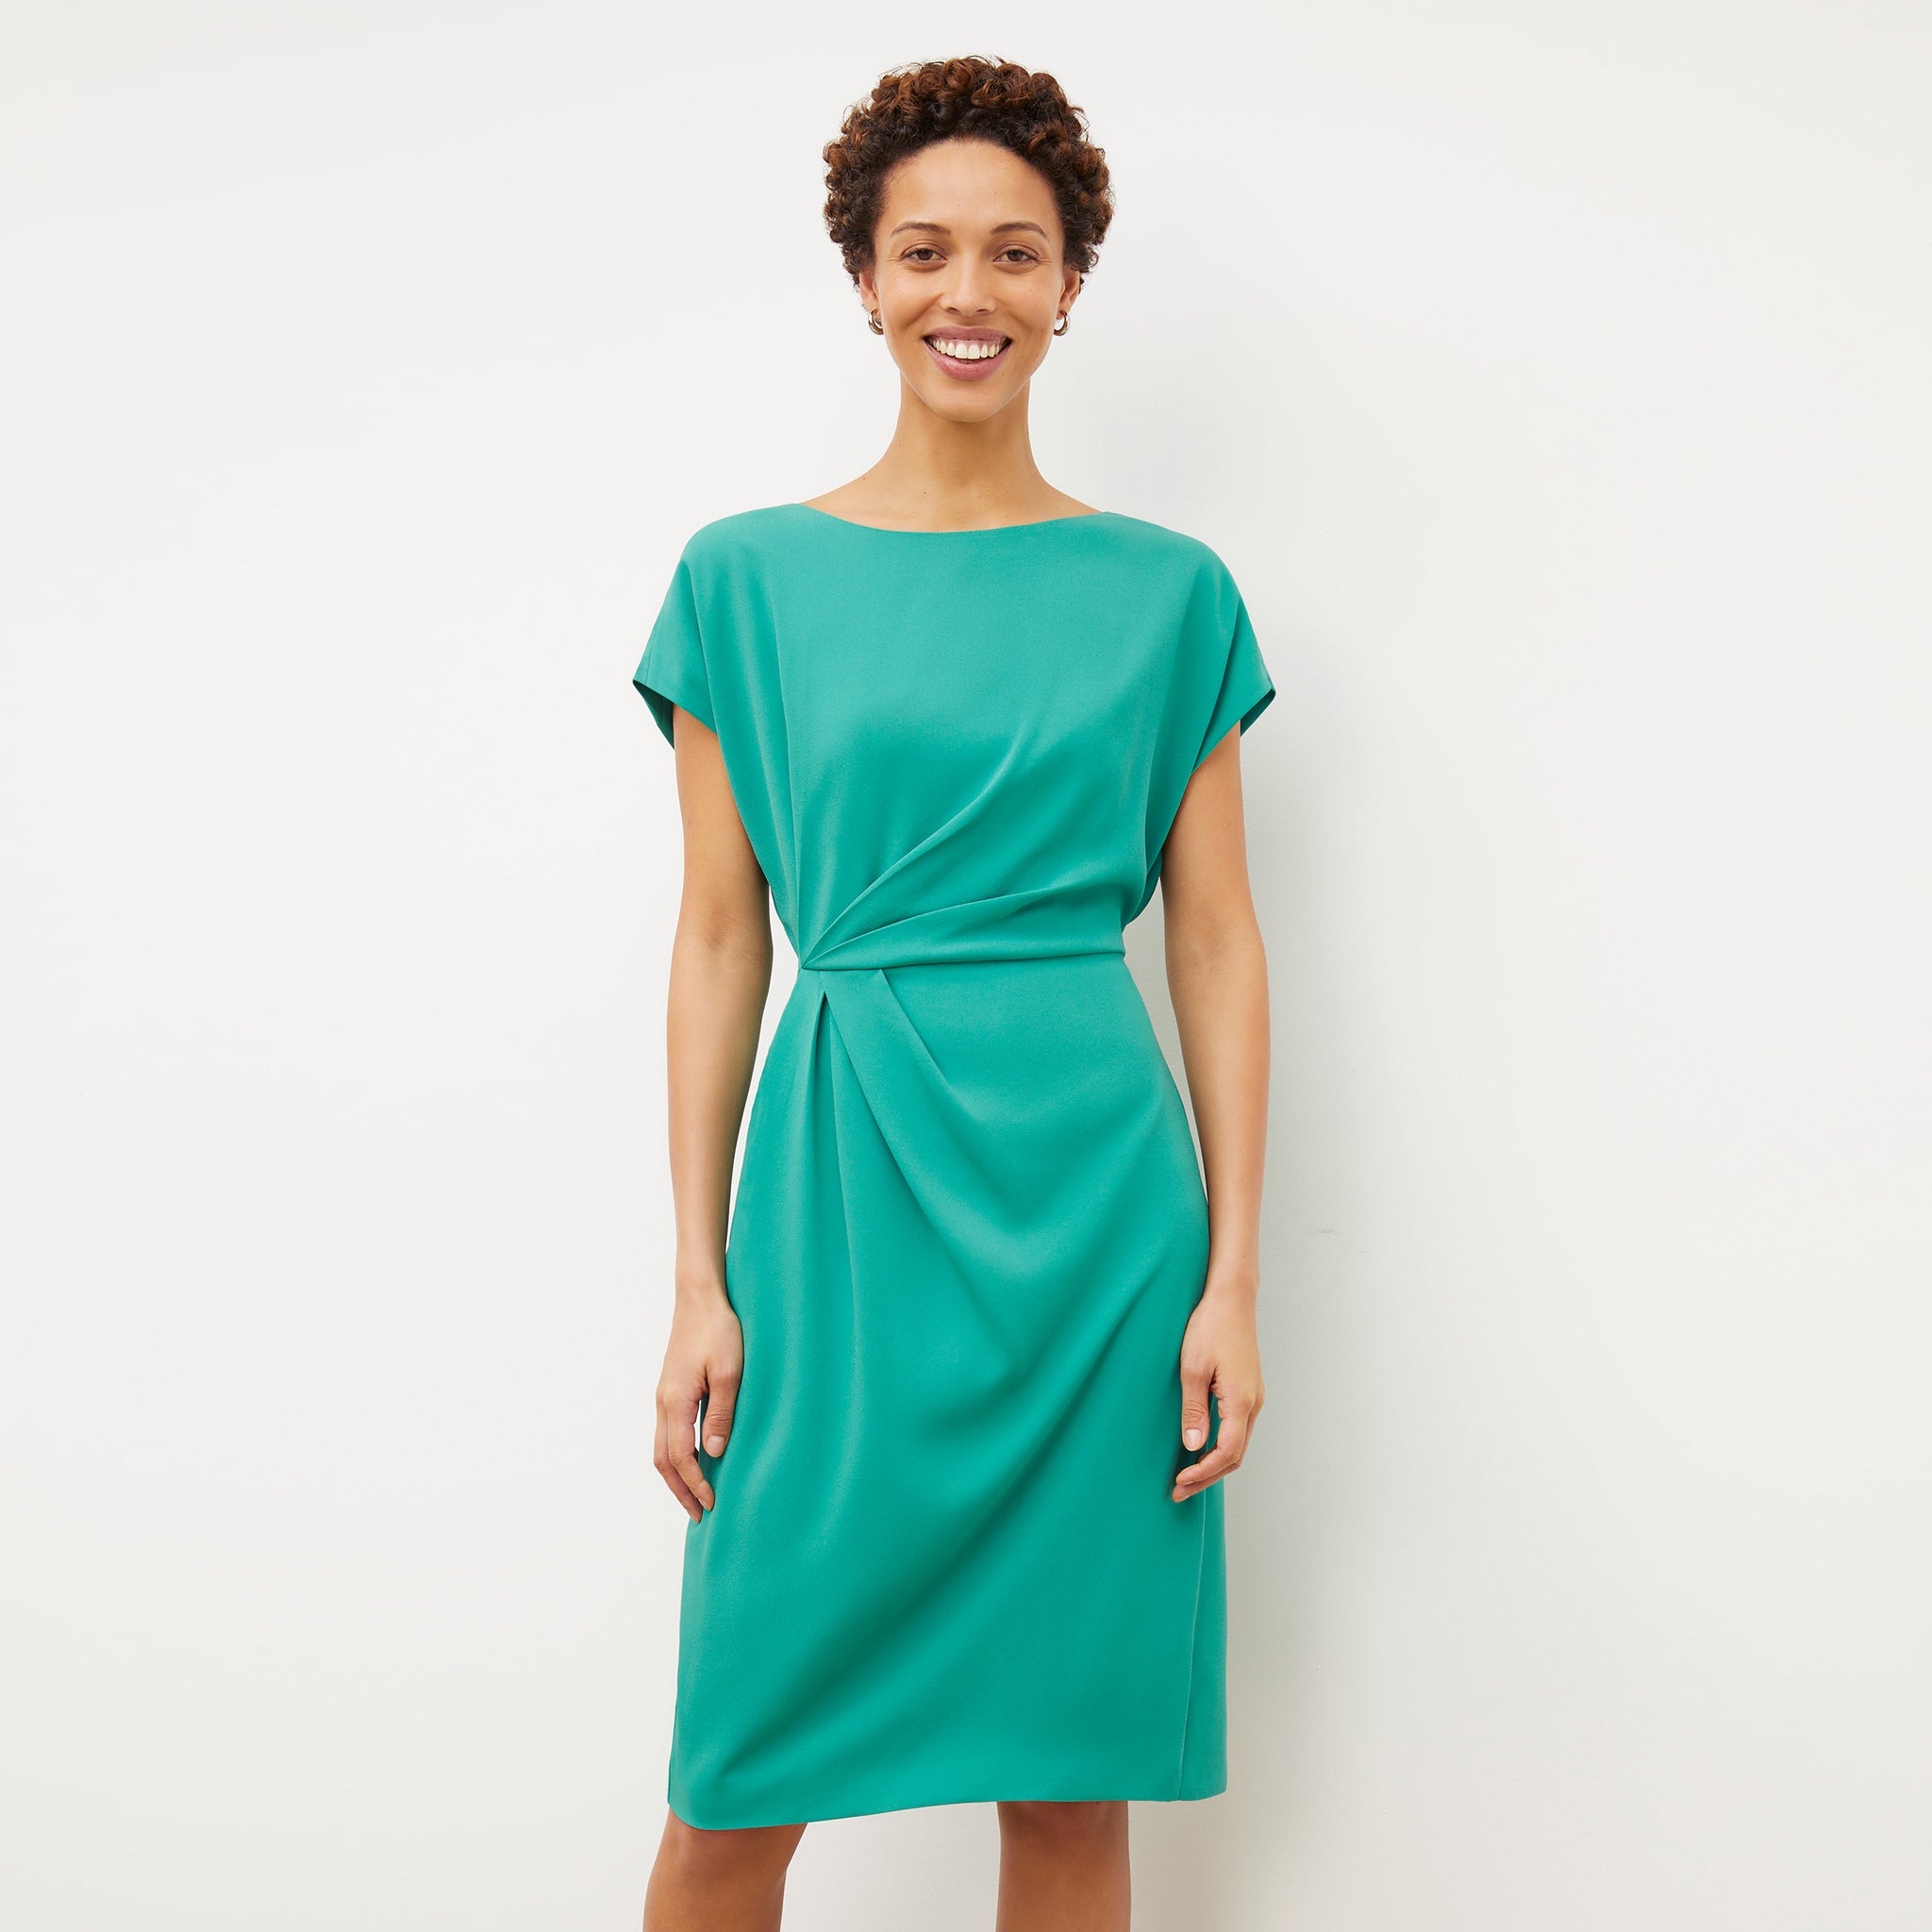 Front image of a woman wearing the Jillian Dress - Eco Medium Crepe in Tropical Green 